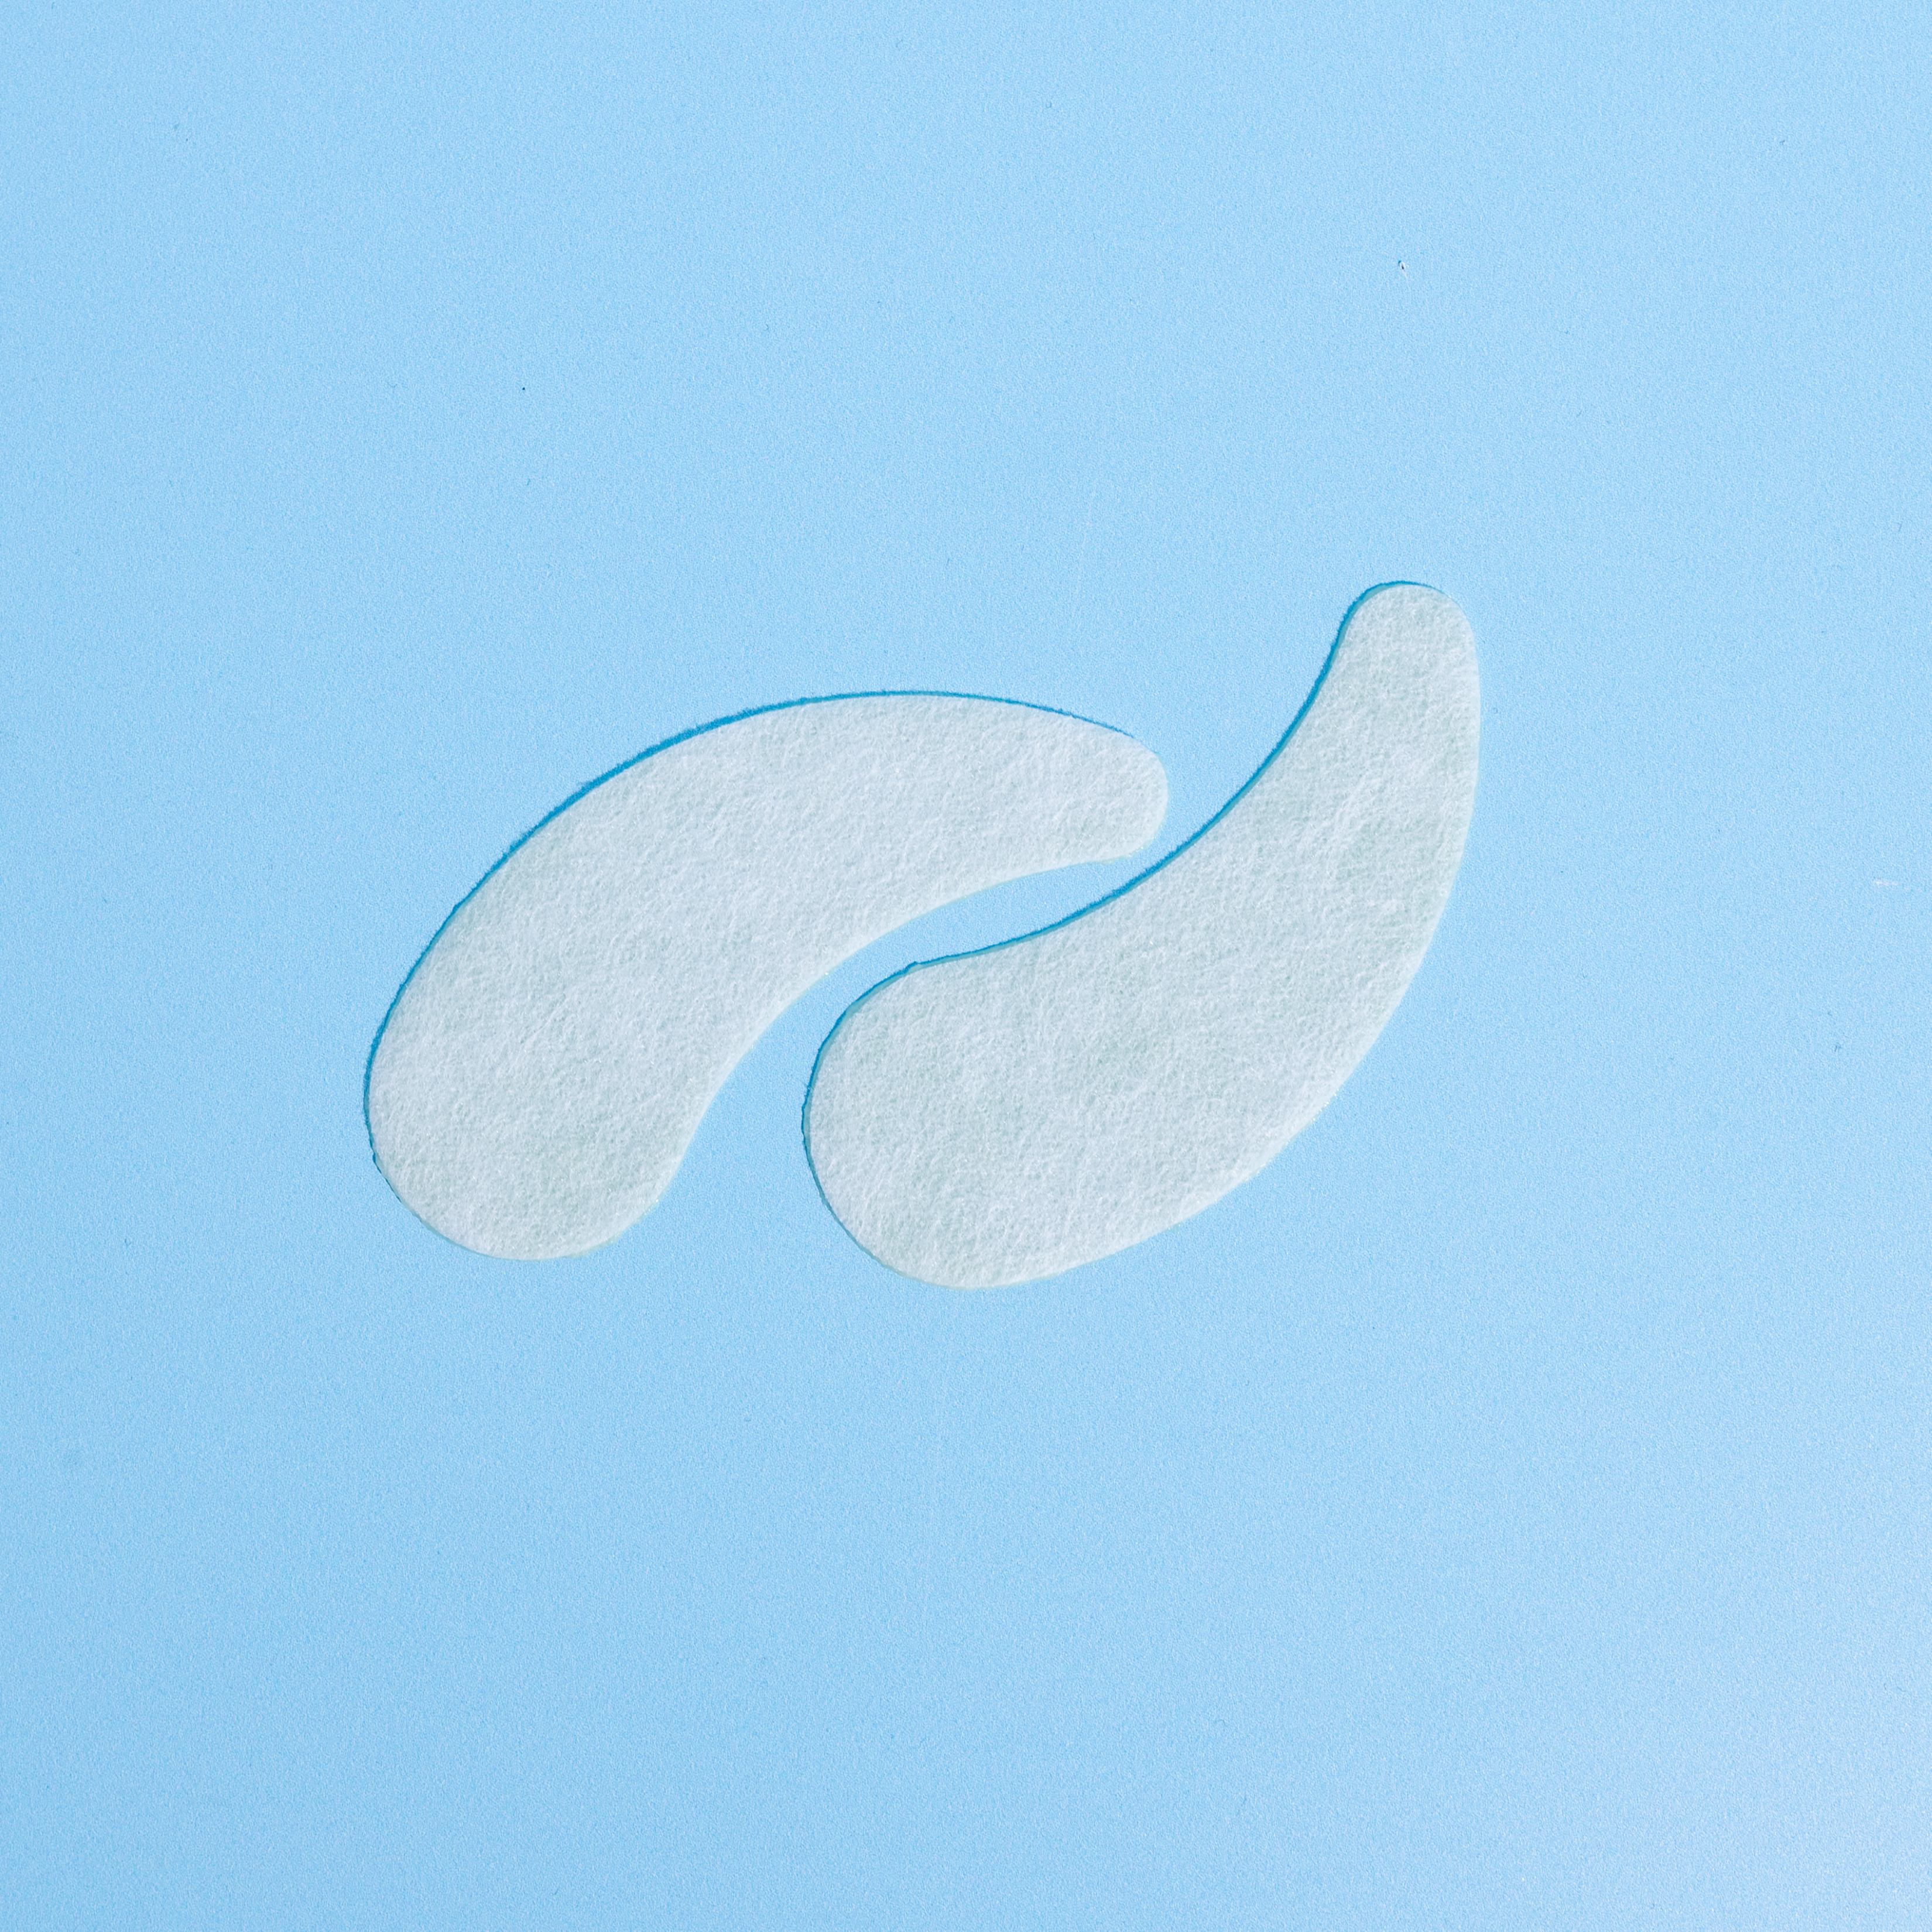 Soothing Collagen Under Eye Patches